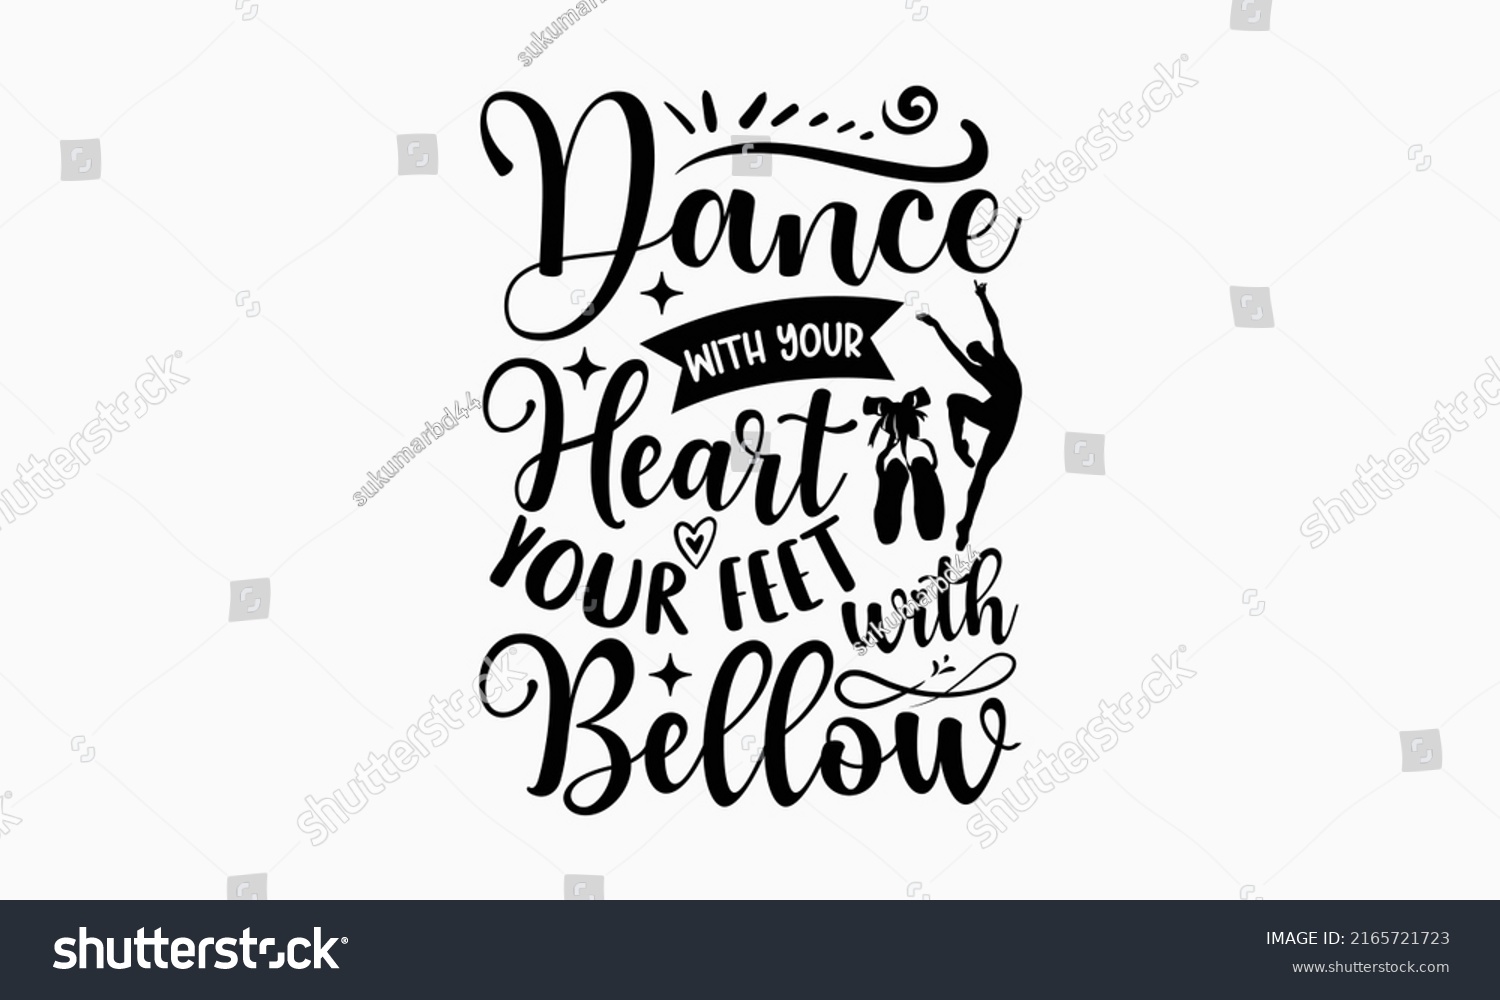 SVG of Dance with your heart your feet with bellow - Ballet t shirt design, SVG Files for Cutting, Handmade calligraphy vector illustration, Hand written vector sign, EPS svg